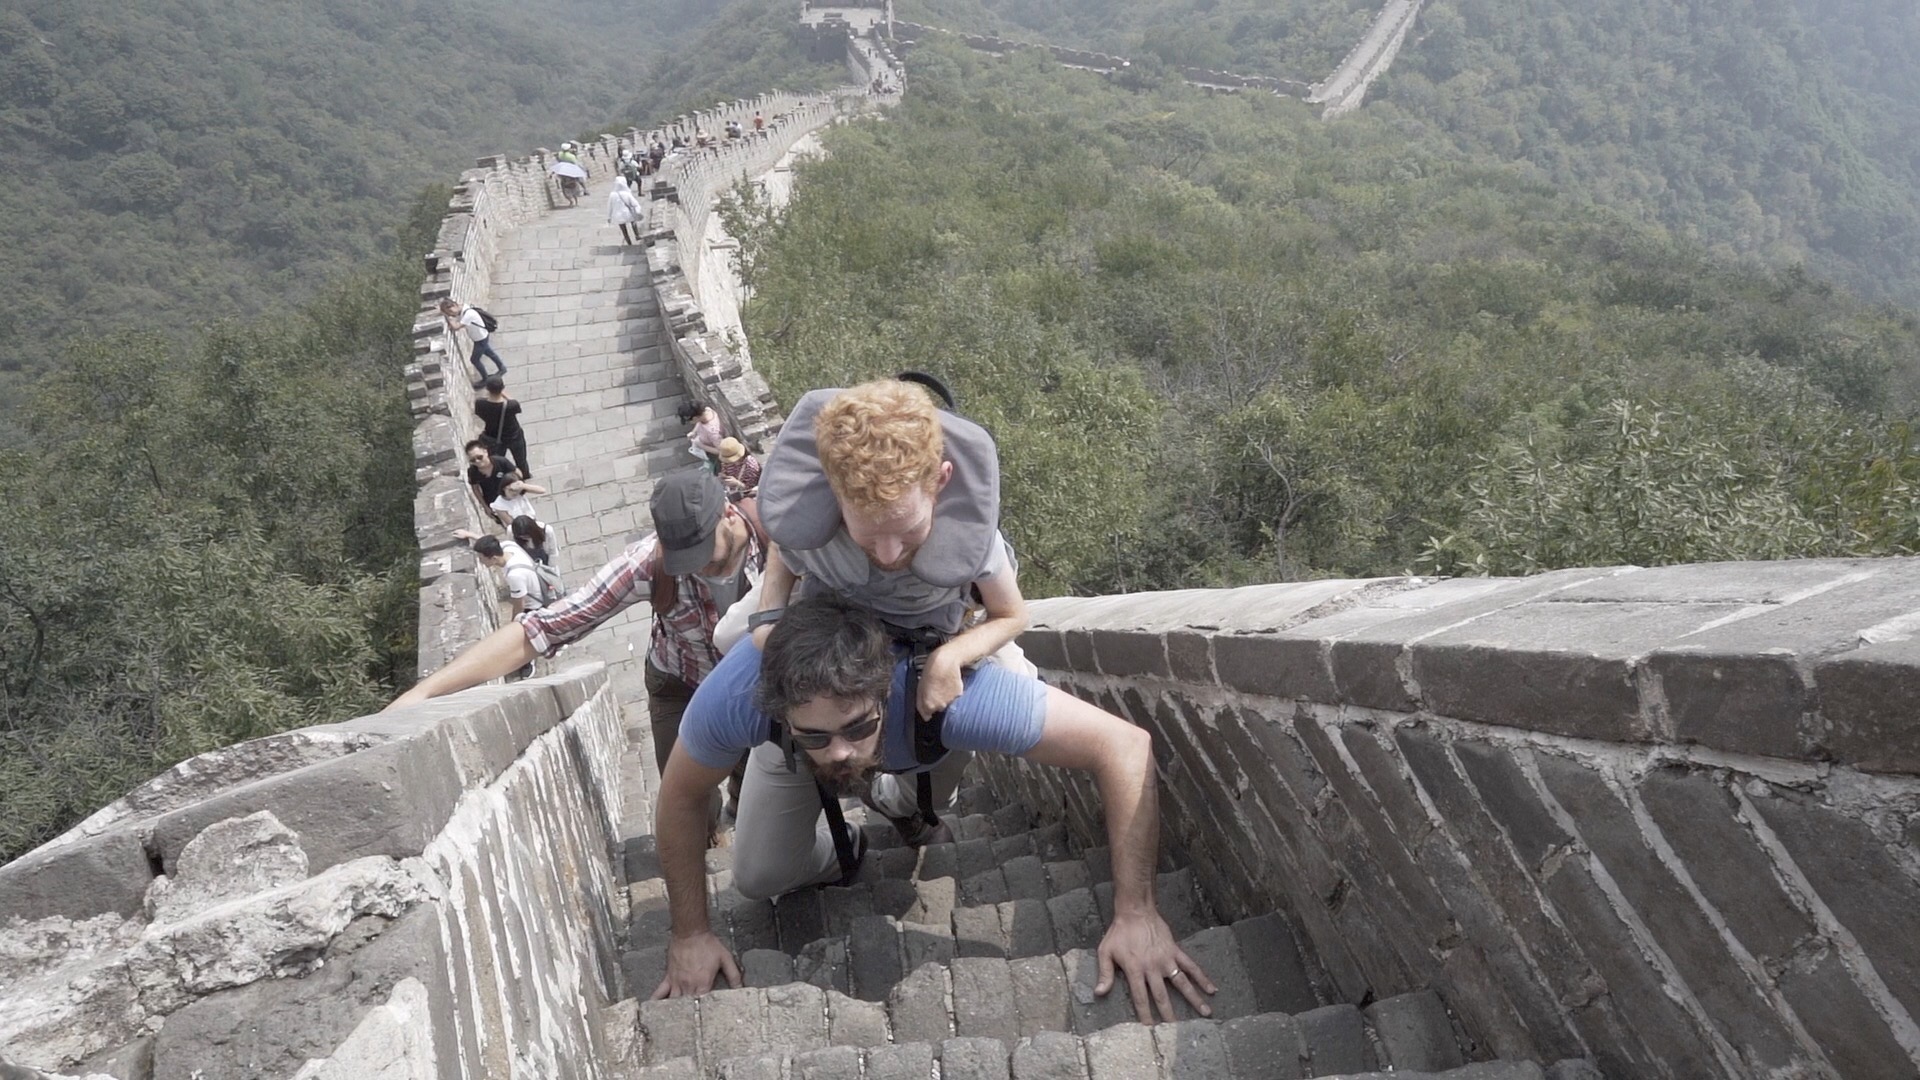 Kevan is being carried by his friend on a very steep section of the Great Wall of China.